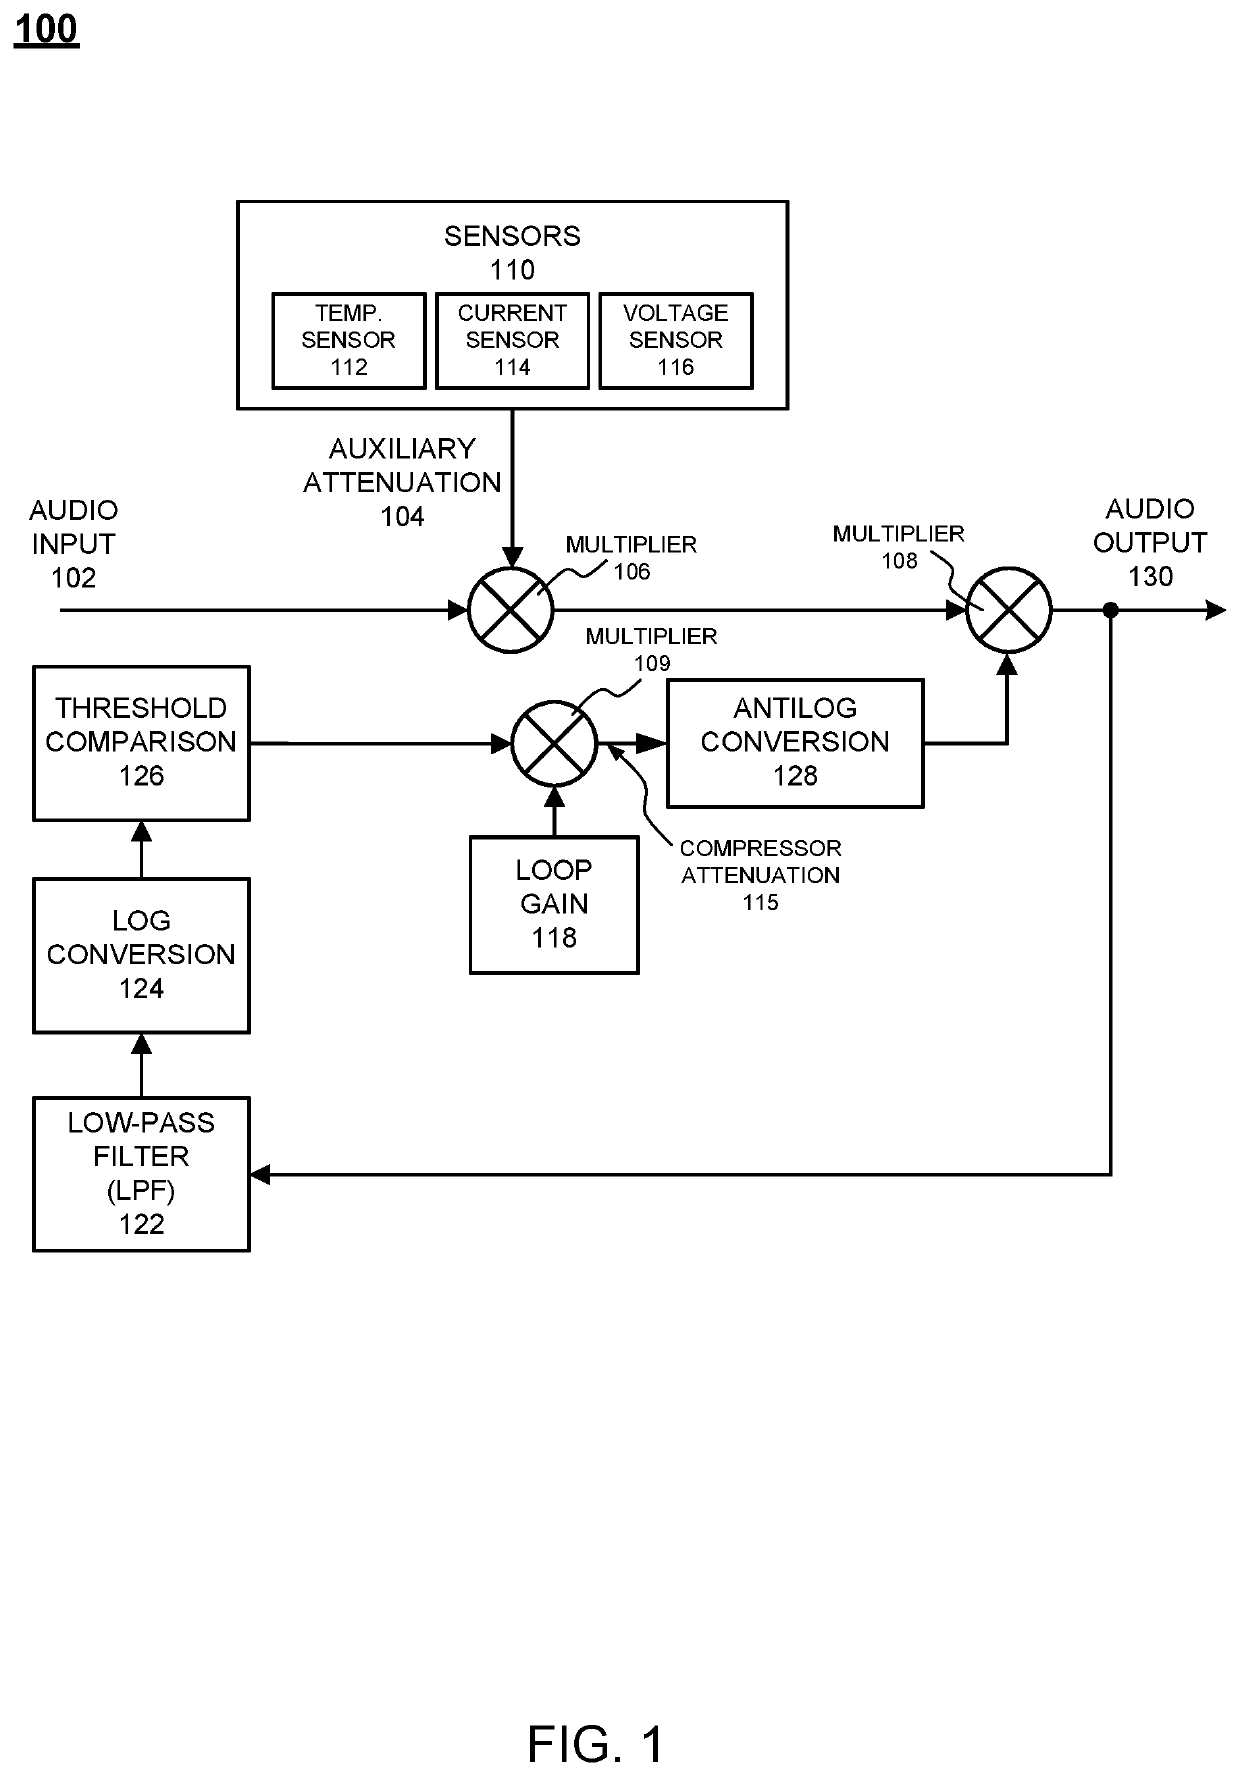 Power limiter configuration for audio signals